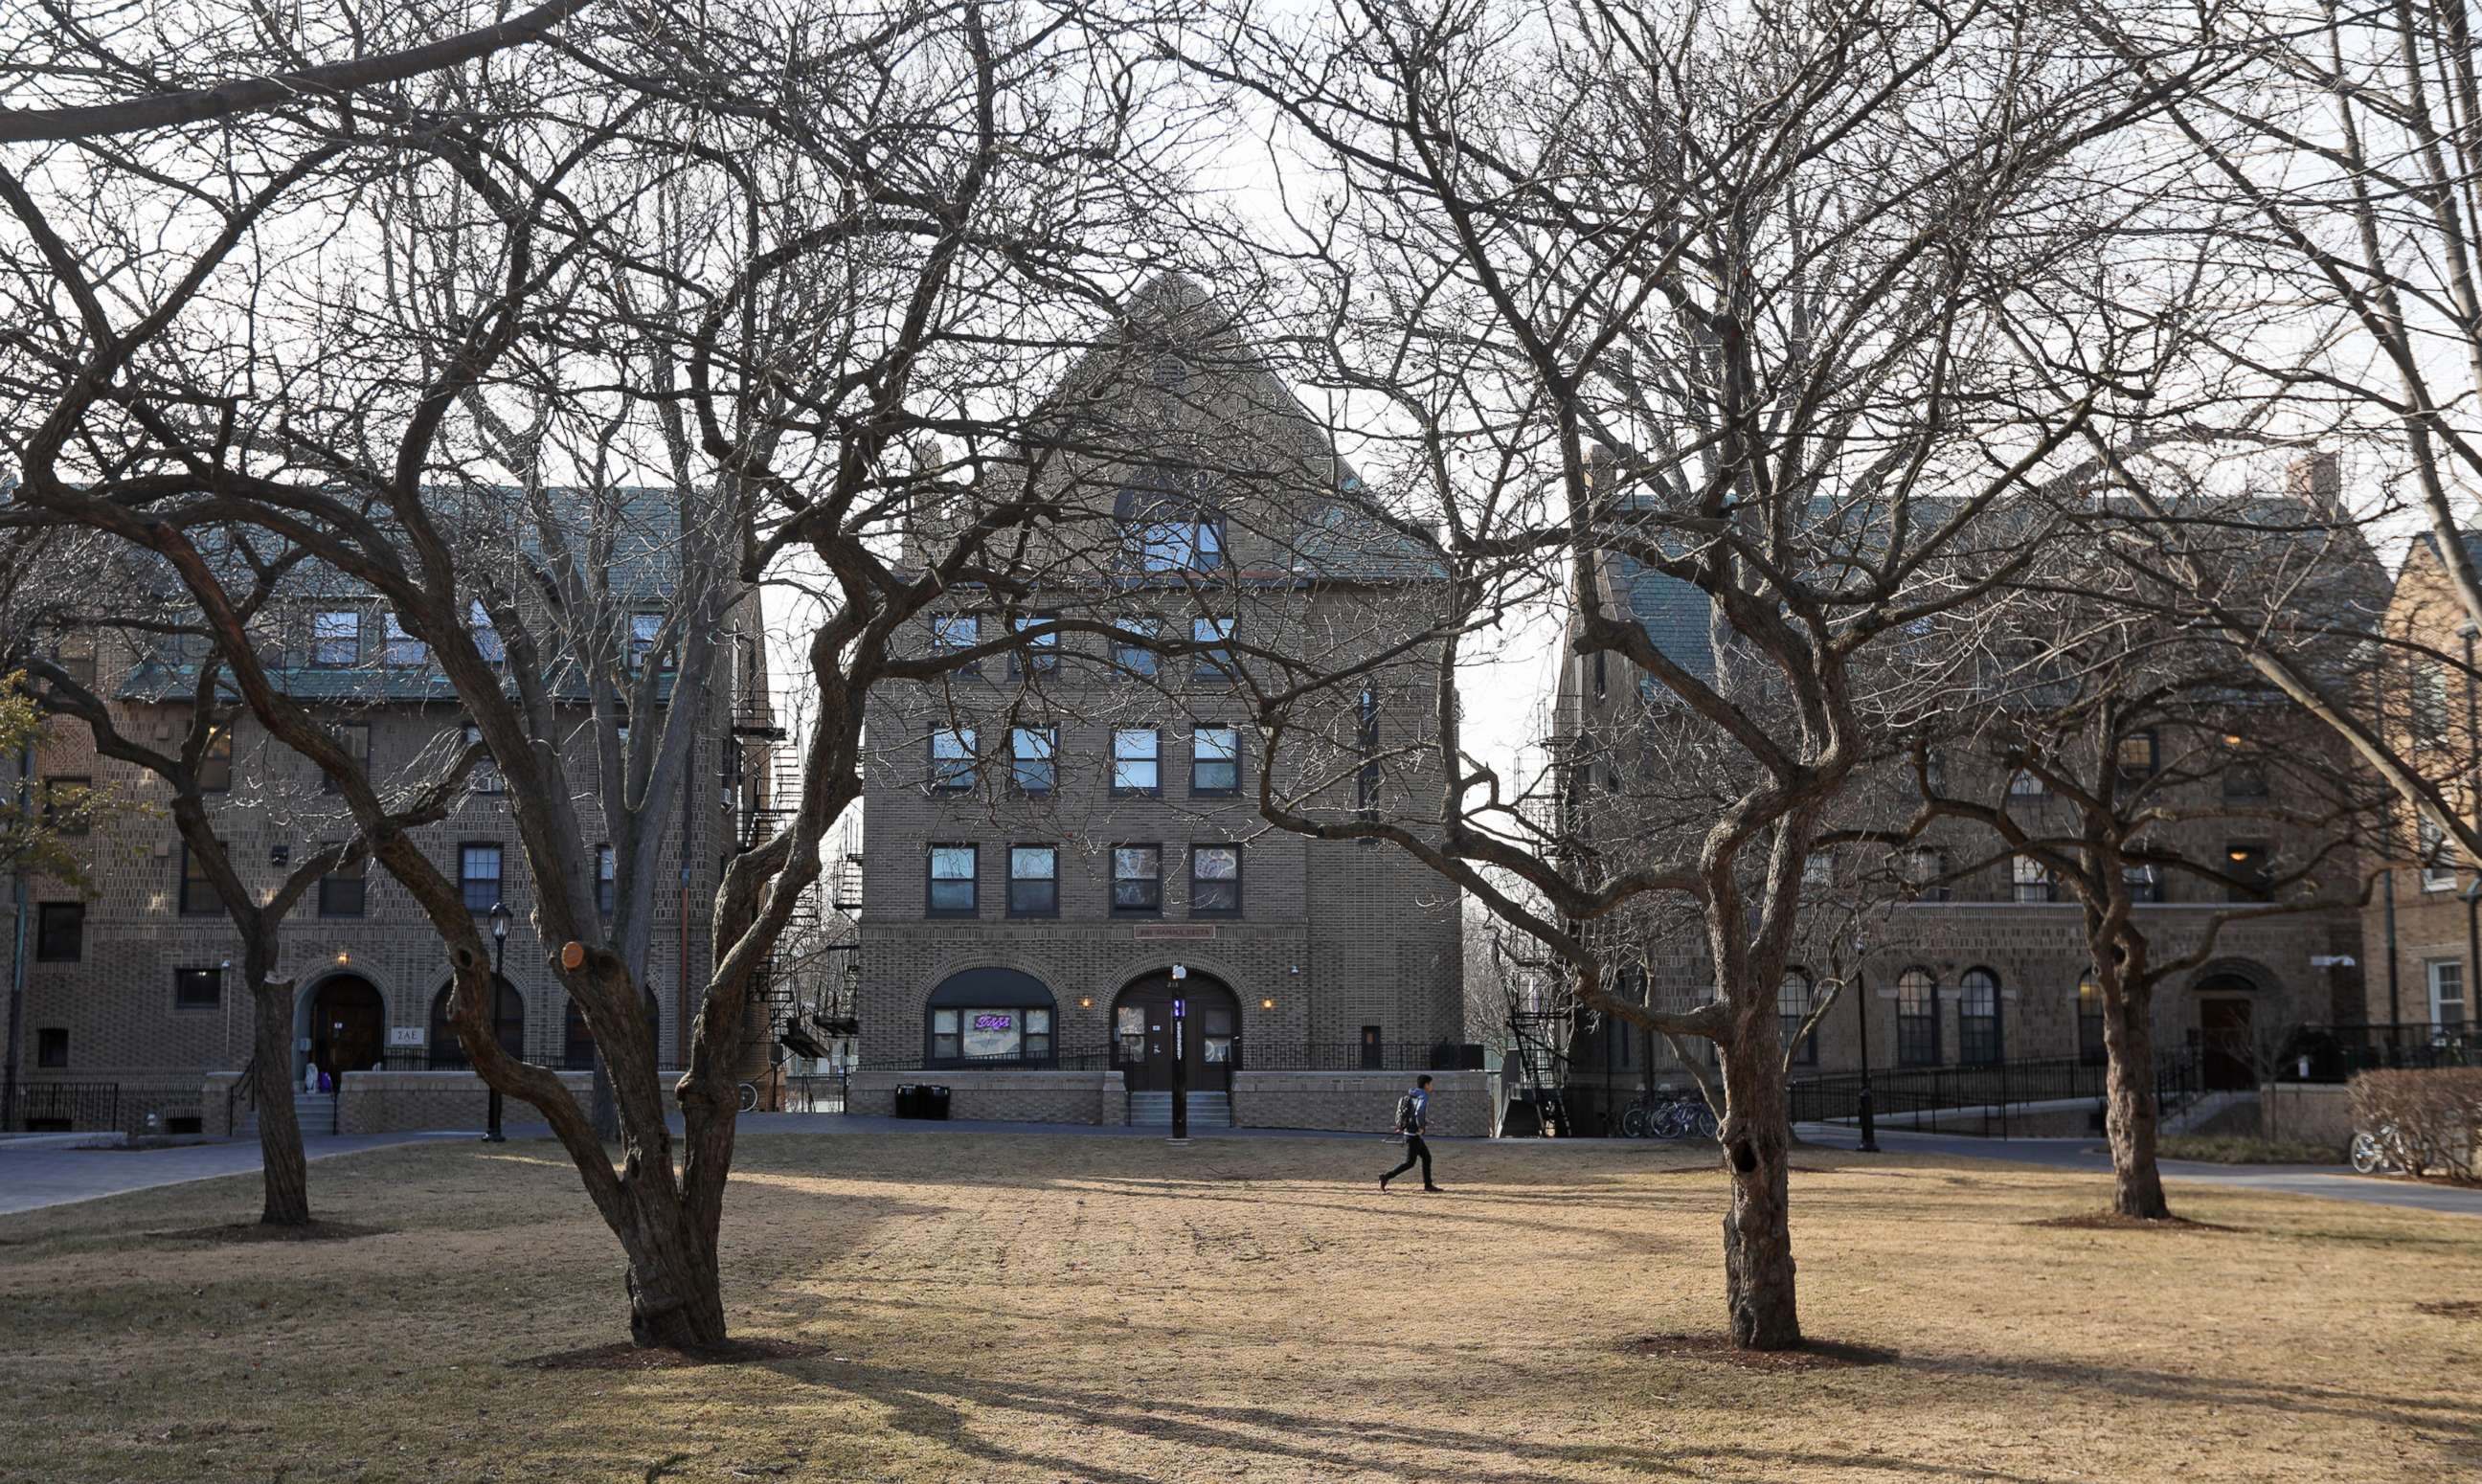 PHOTO: An exterior view Feb. 15, 2017 shows a quadrangle bordered by fraternities on the campus of Northwestern University in Evanston, Ill.